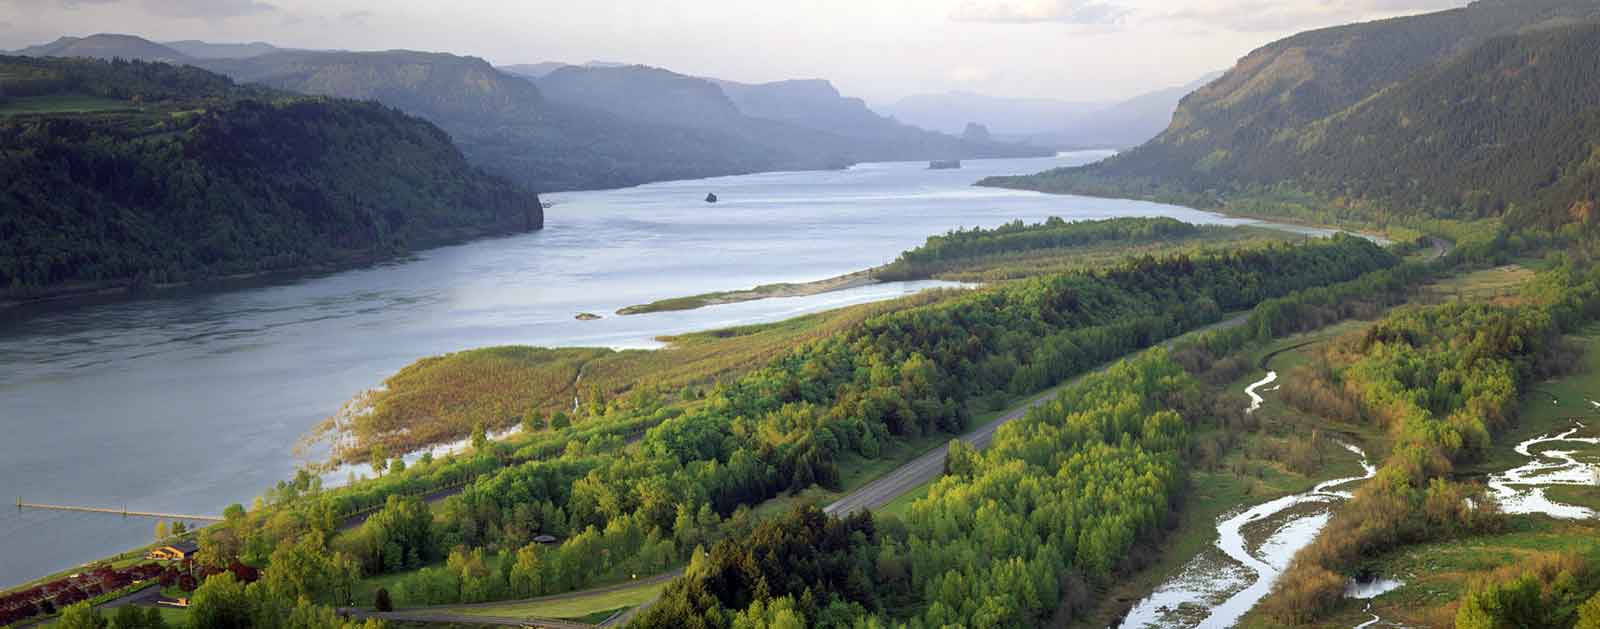 Columbia River basin site shows early evidence of first Americans